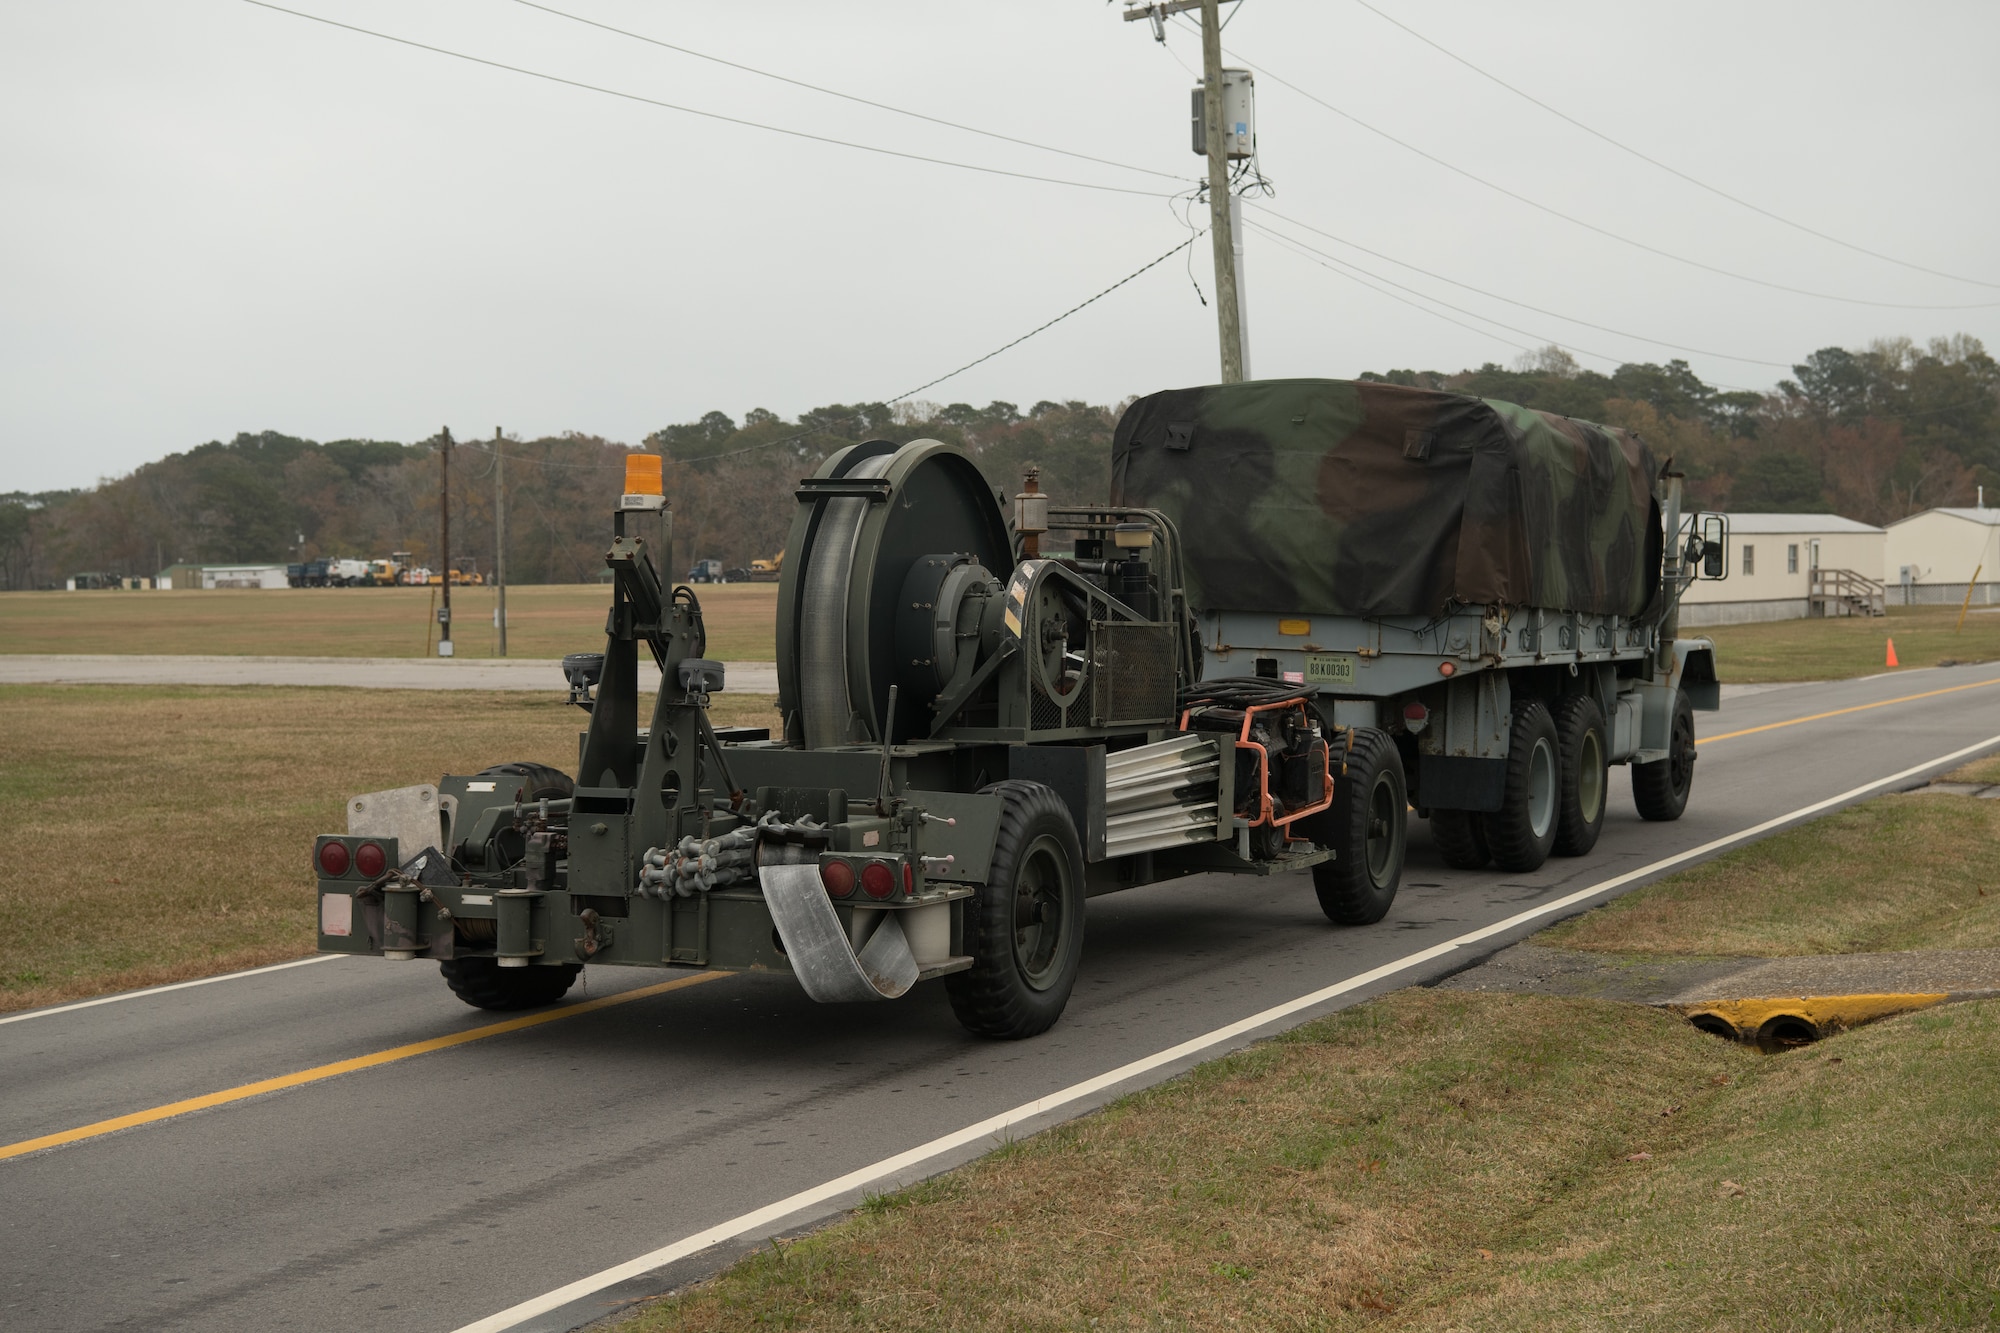 A truck transports part of a mobile aircraft arrest system